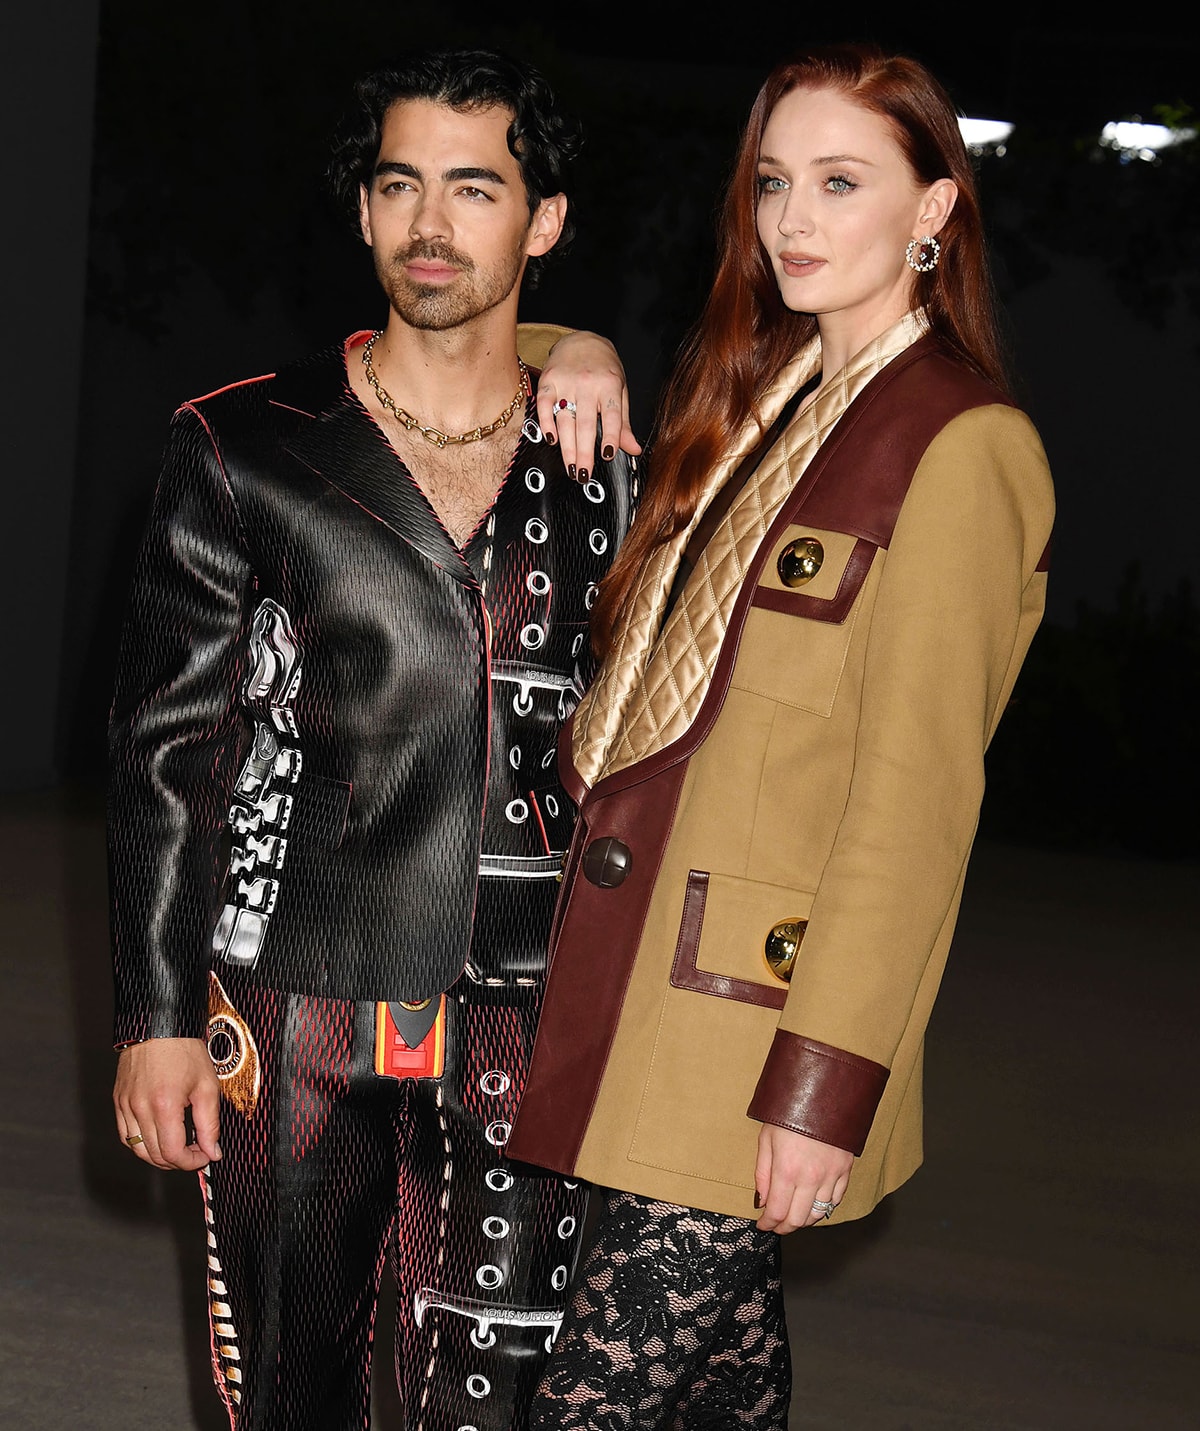 Joe Jonas and Sophie Turner pictured at the 2nd Annual Academy Museum Gala on October 16, 2022